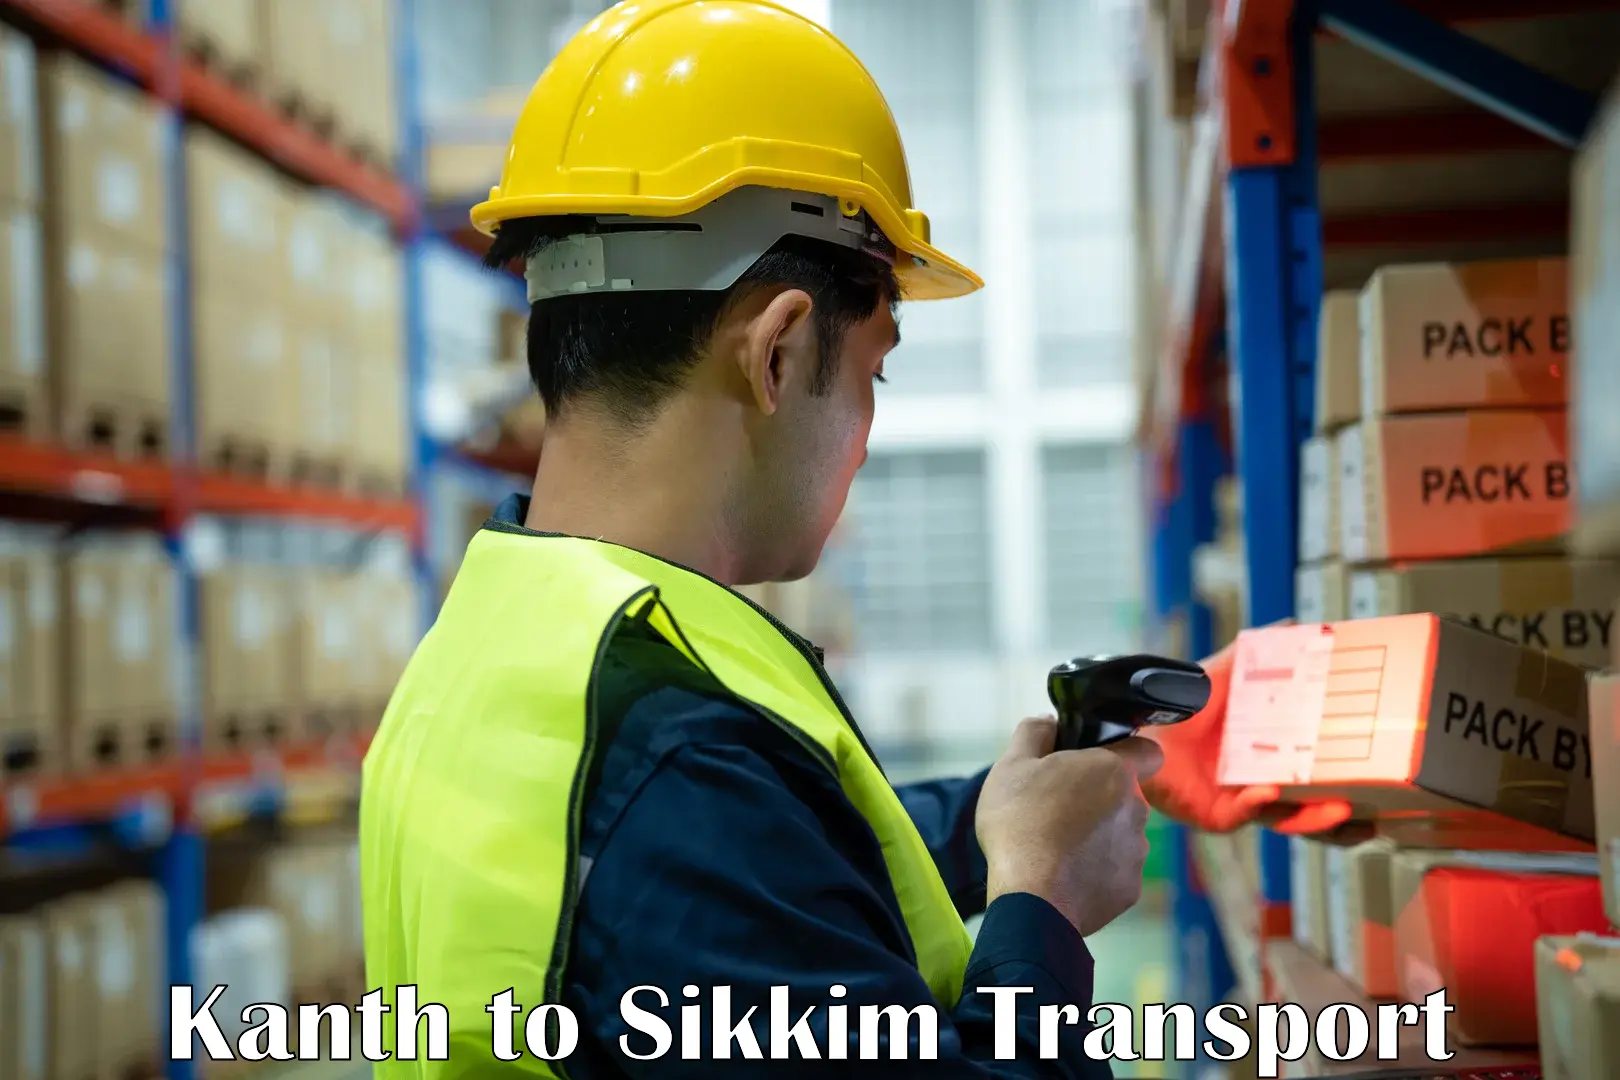 Online transport service Kanth to South Sikkim